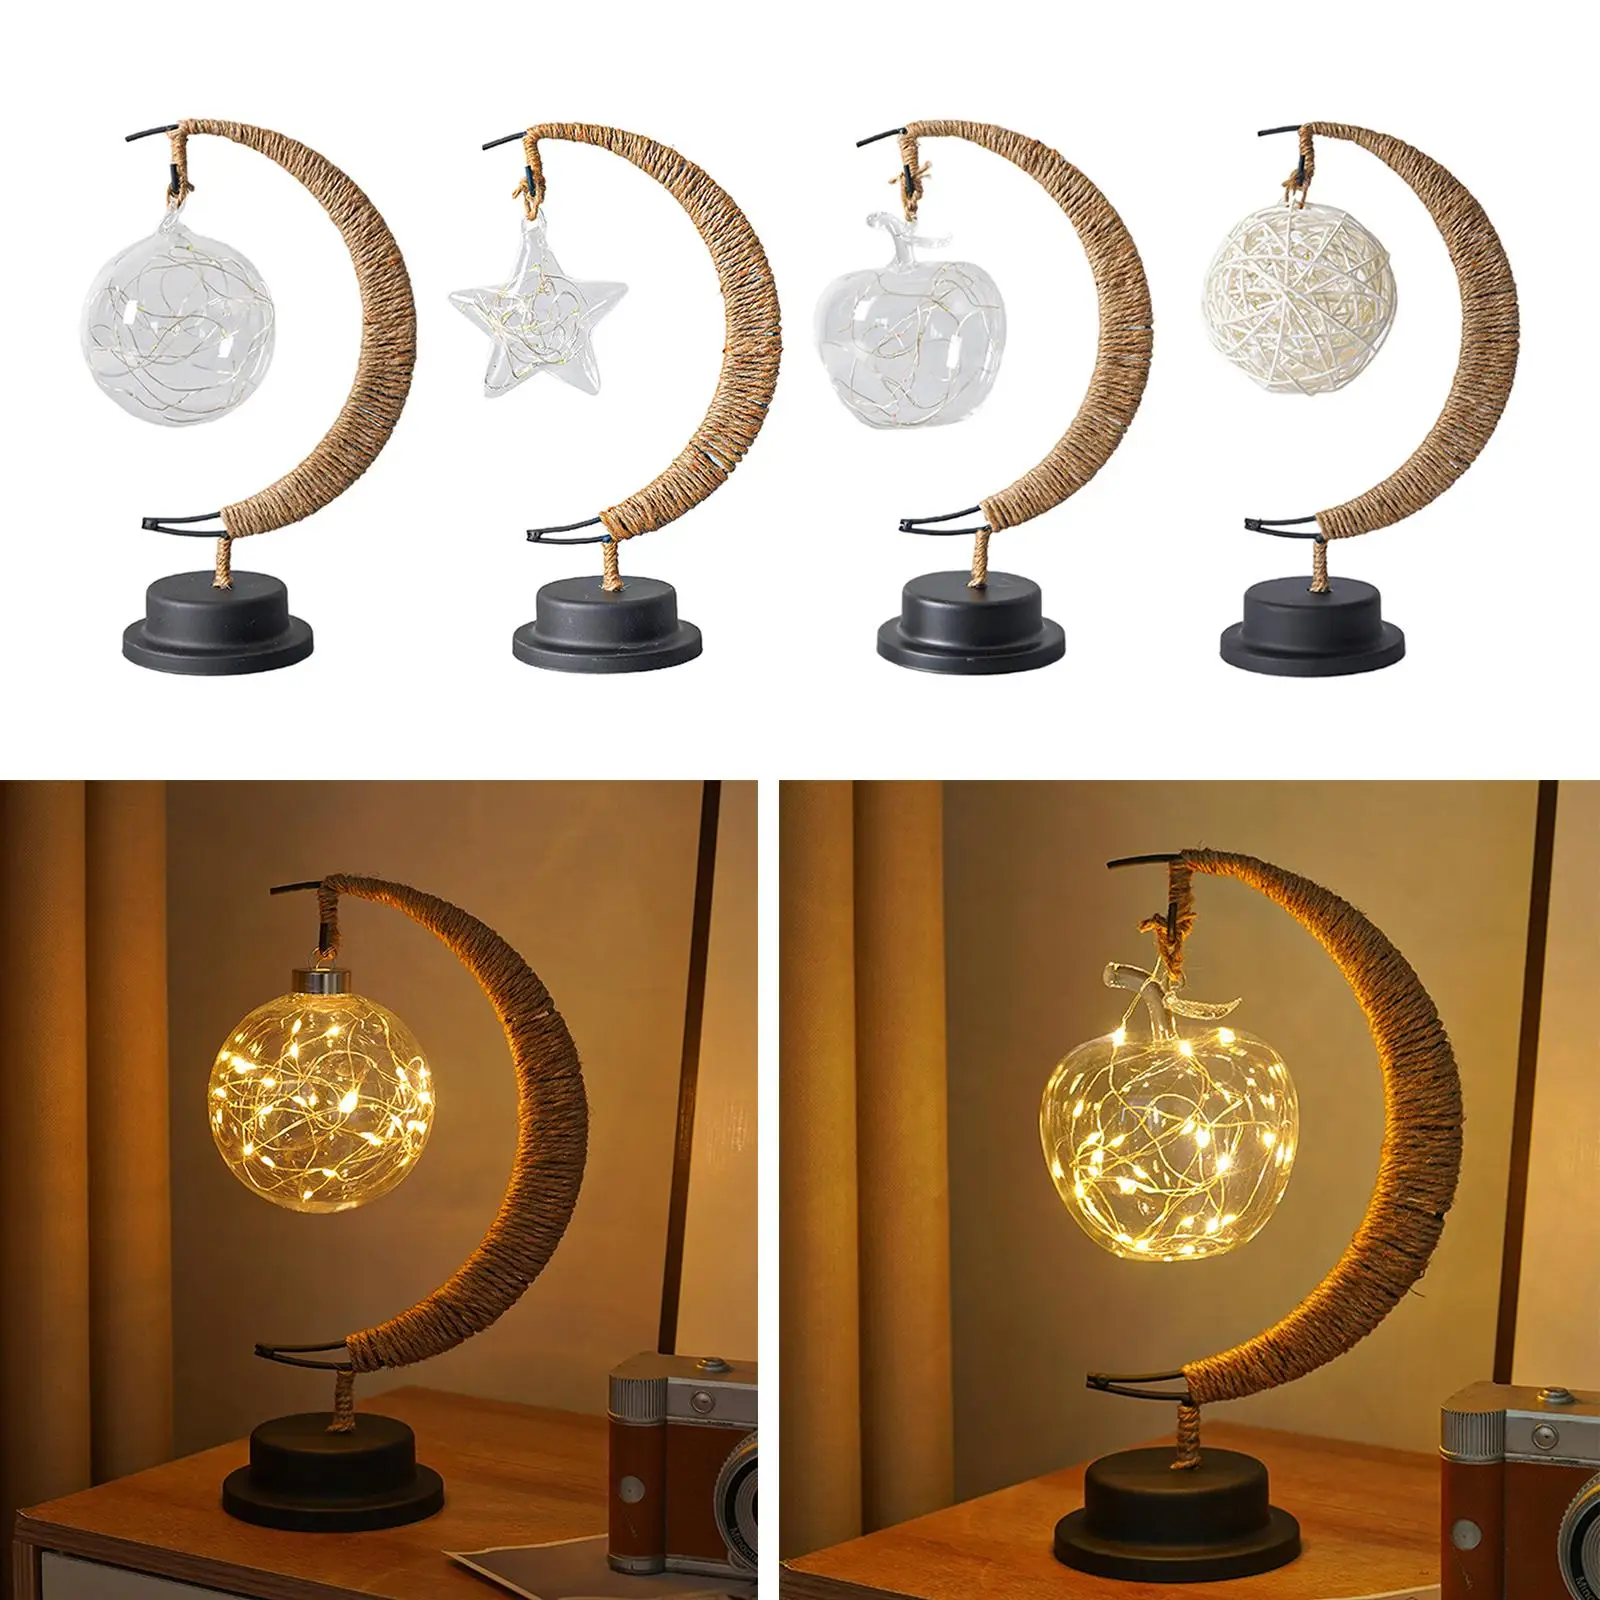 LED Table Lamp USB Rechargeable, Warm Light Atmosphere Lamps Moon Night Light for Office Children Room Nursery Xmas Decoration